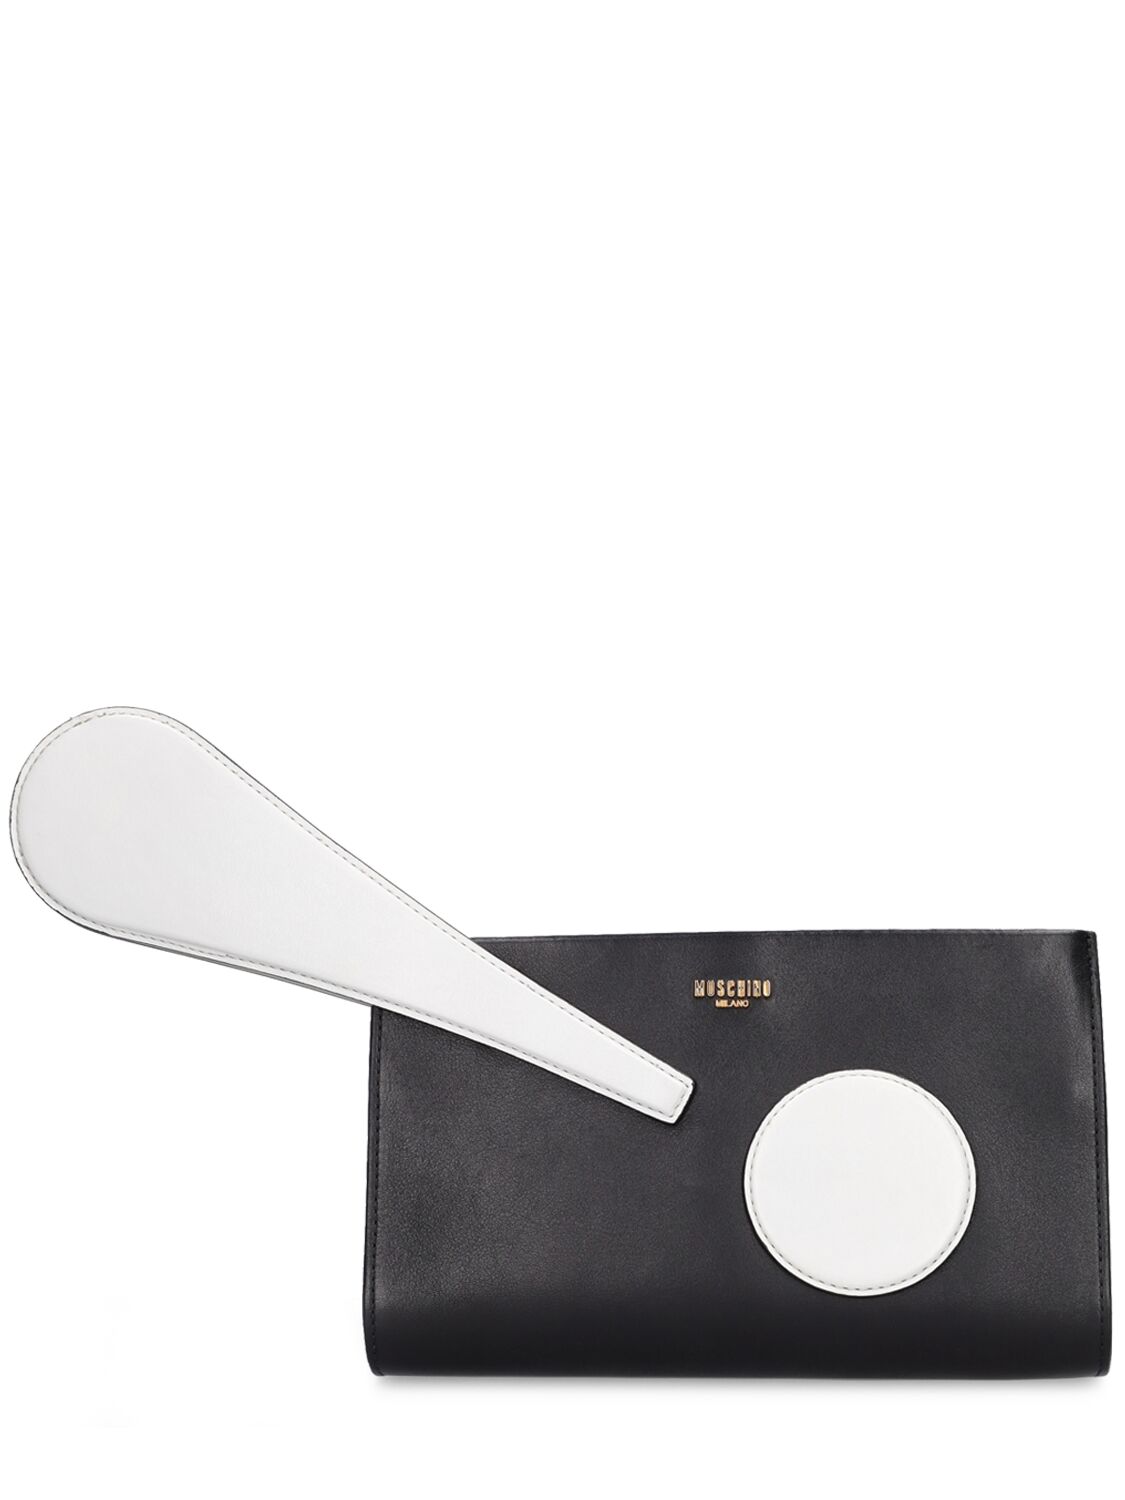 Gone With The Wind Leather Clutch